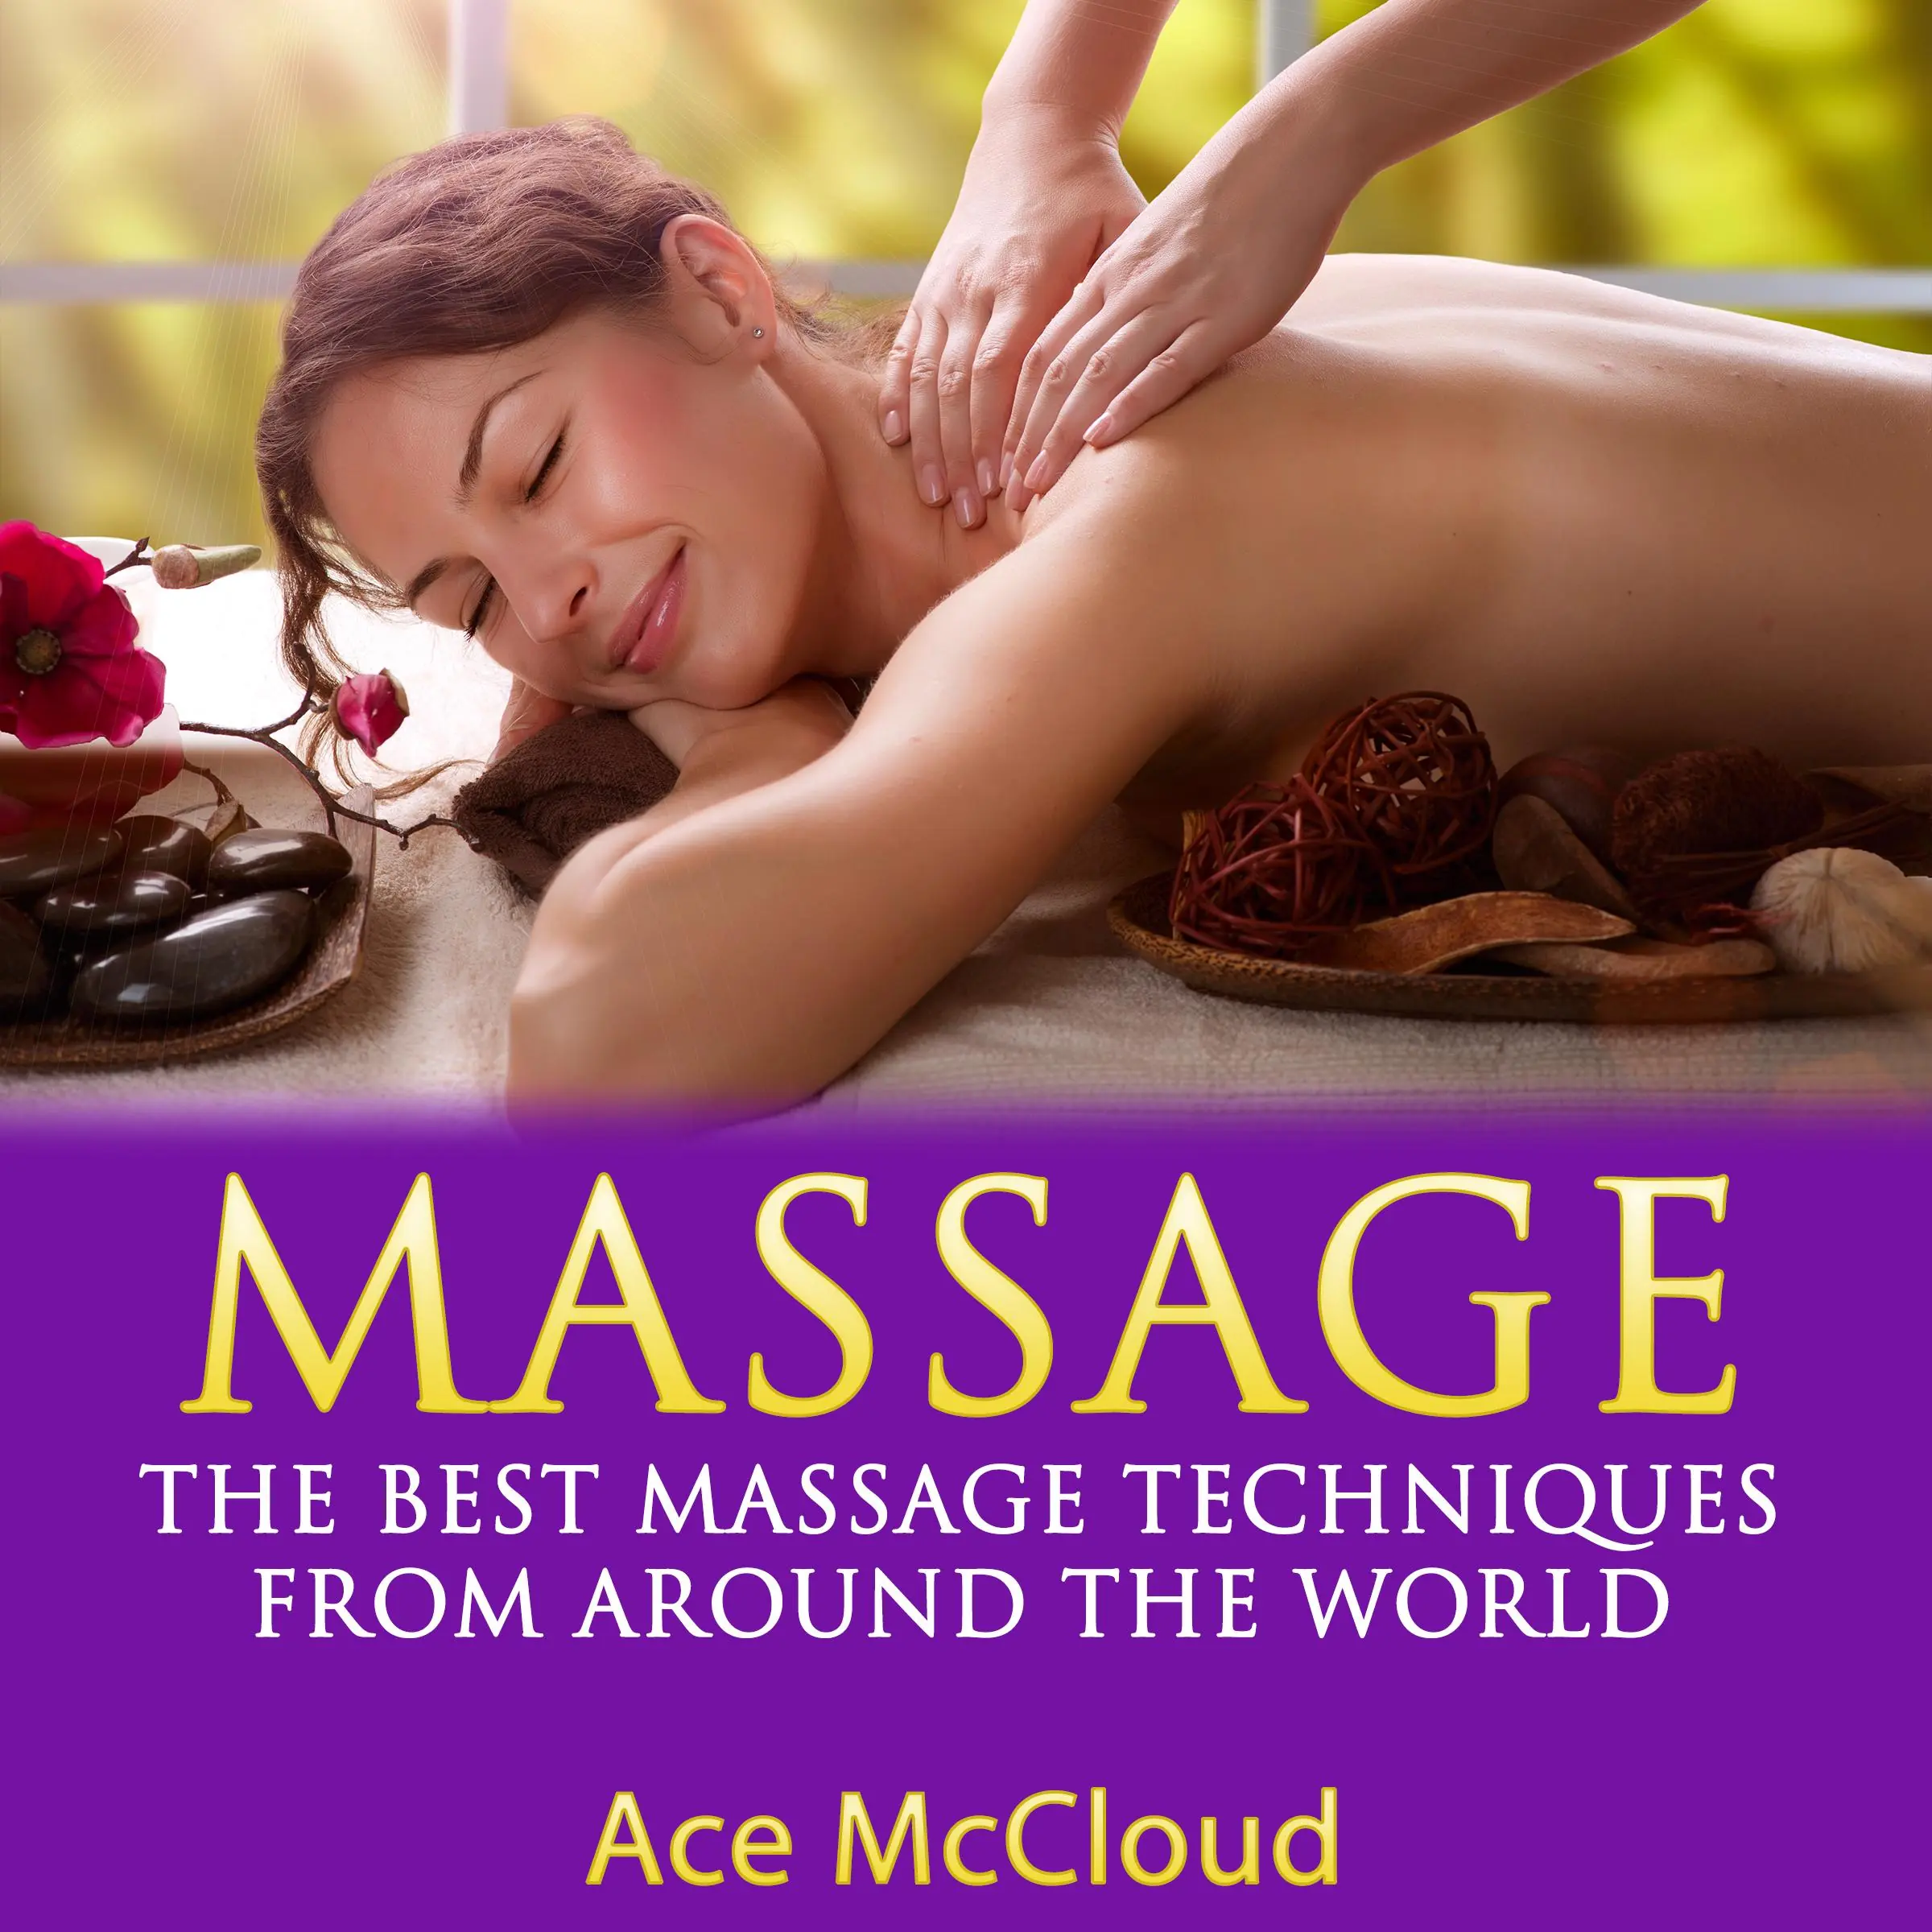 Massage: The Best Massage Techniques From Around The World Audiobook by Ace McCloud